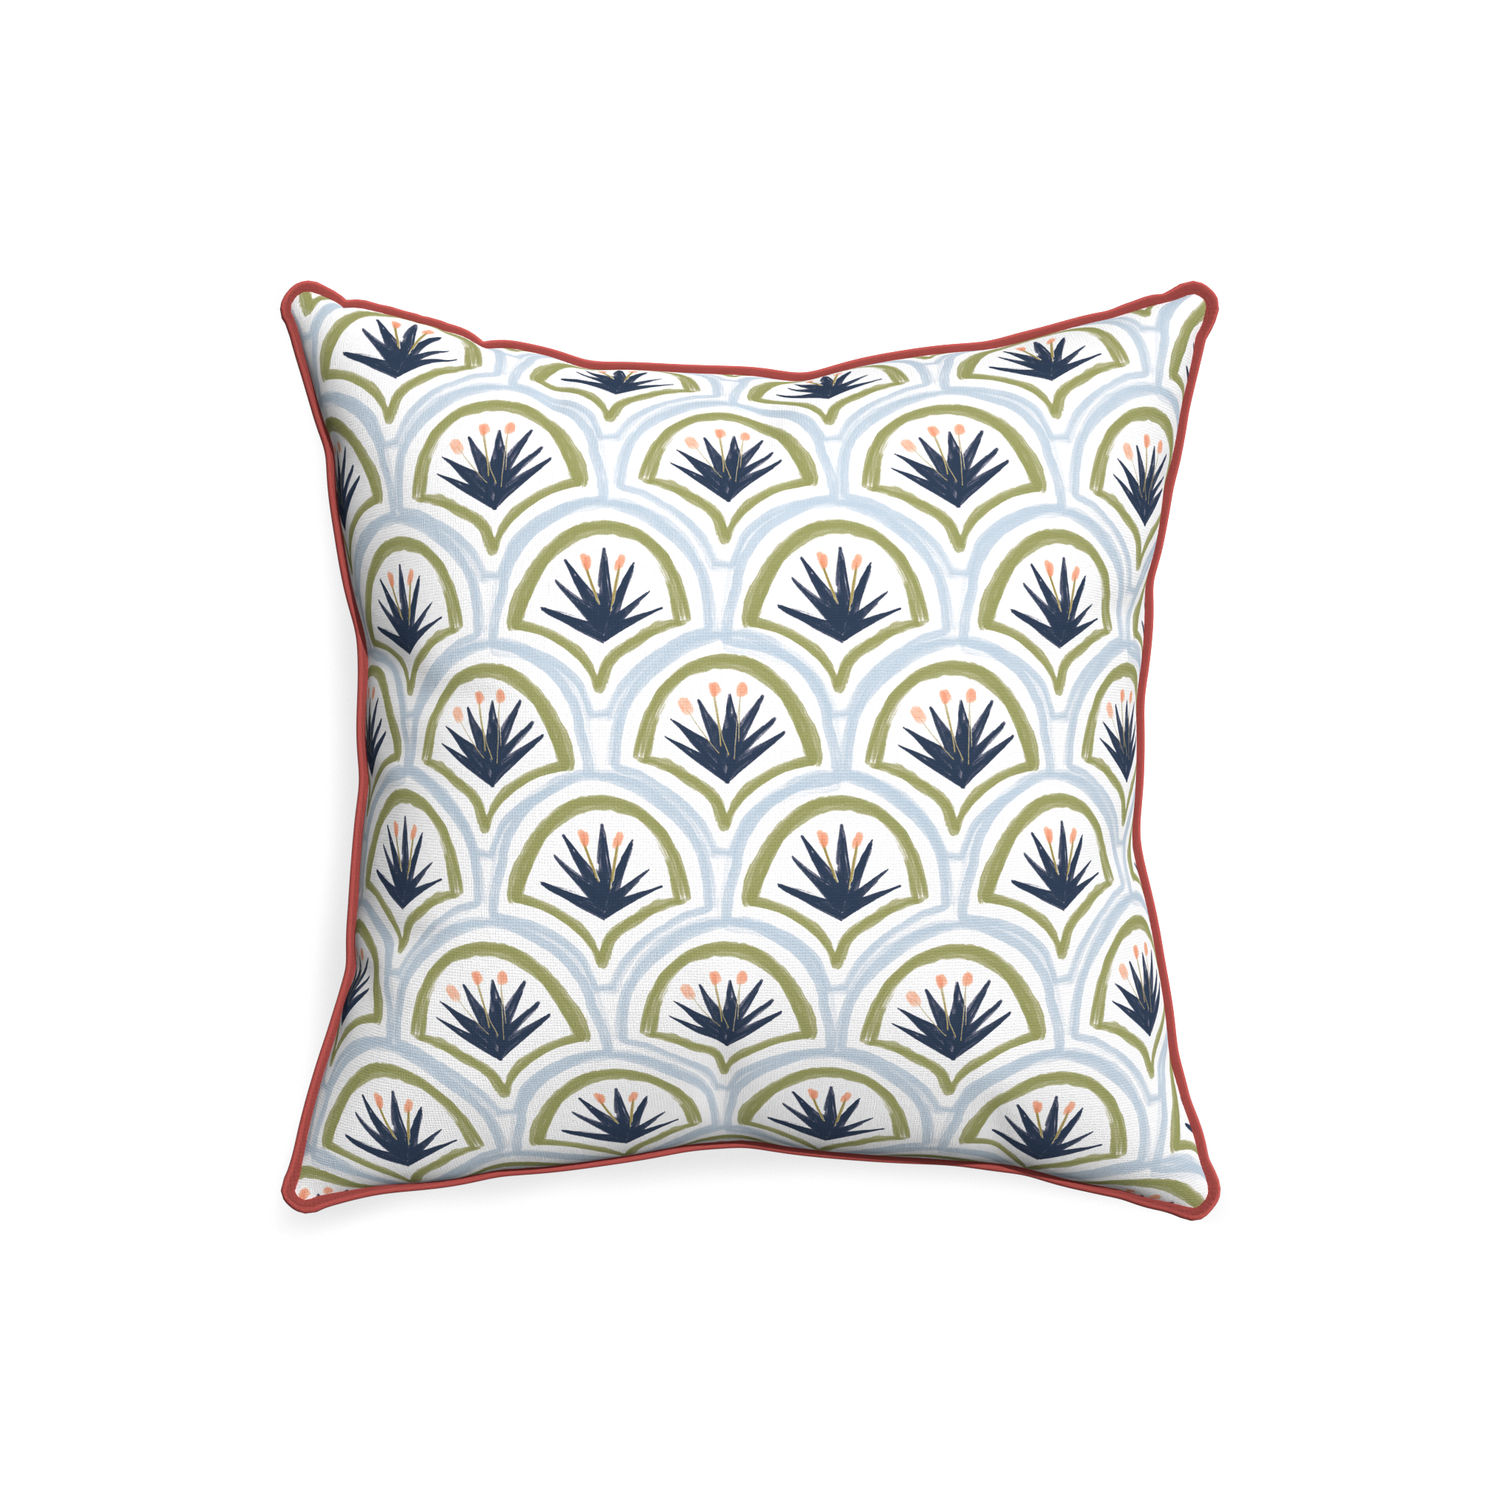 20-square thatcher midnight custom art deco palm patternpillow with c piping on white background